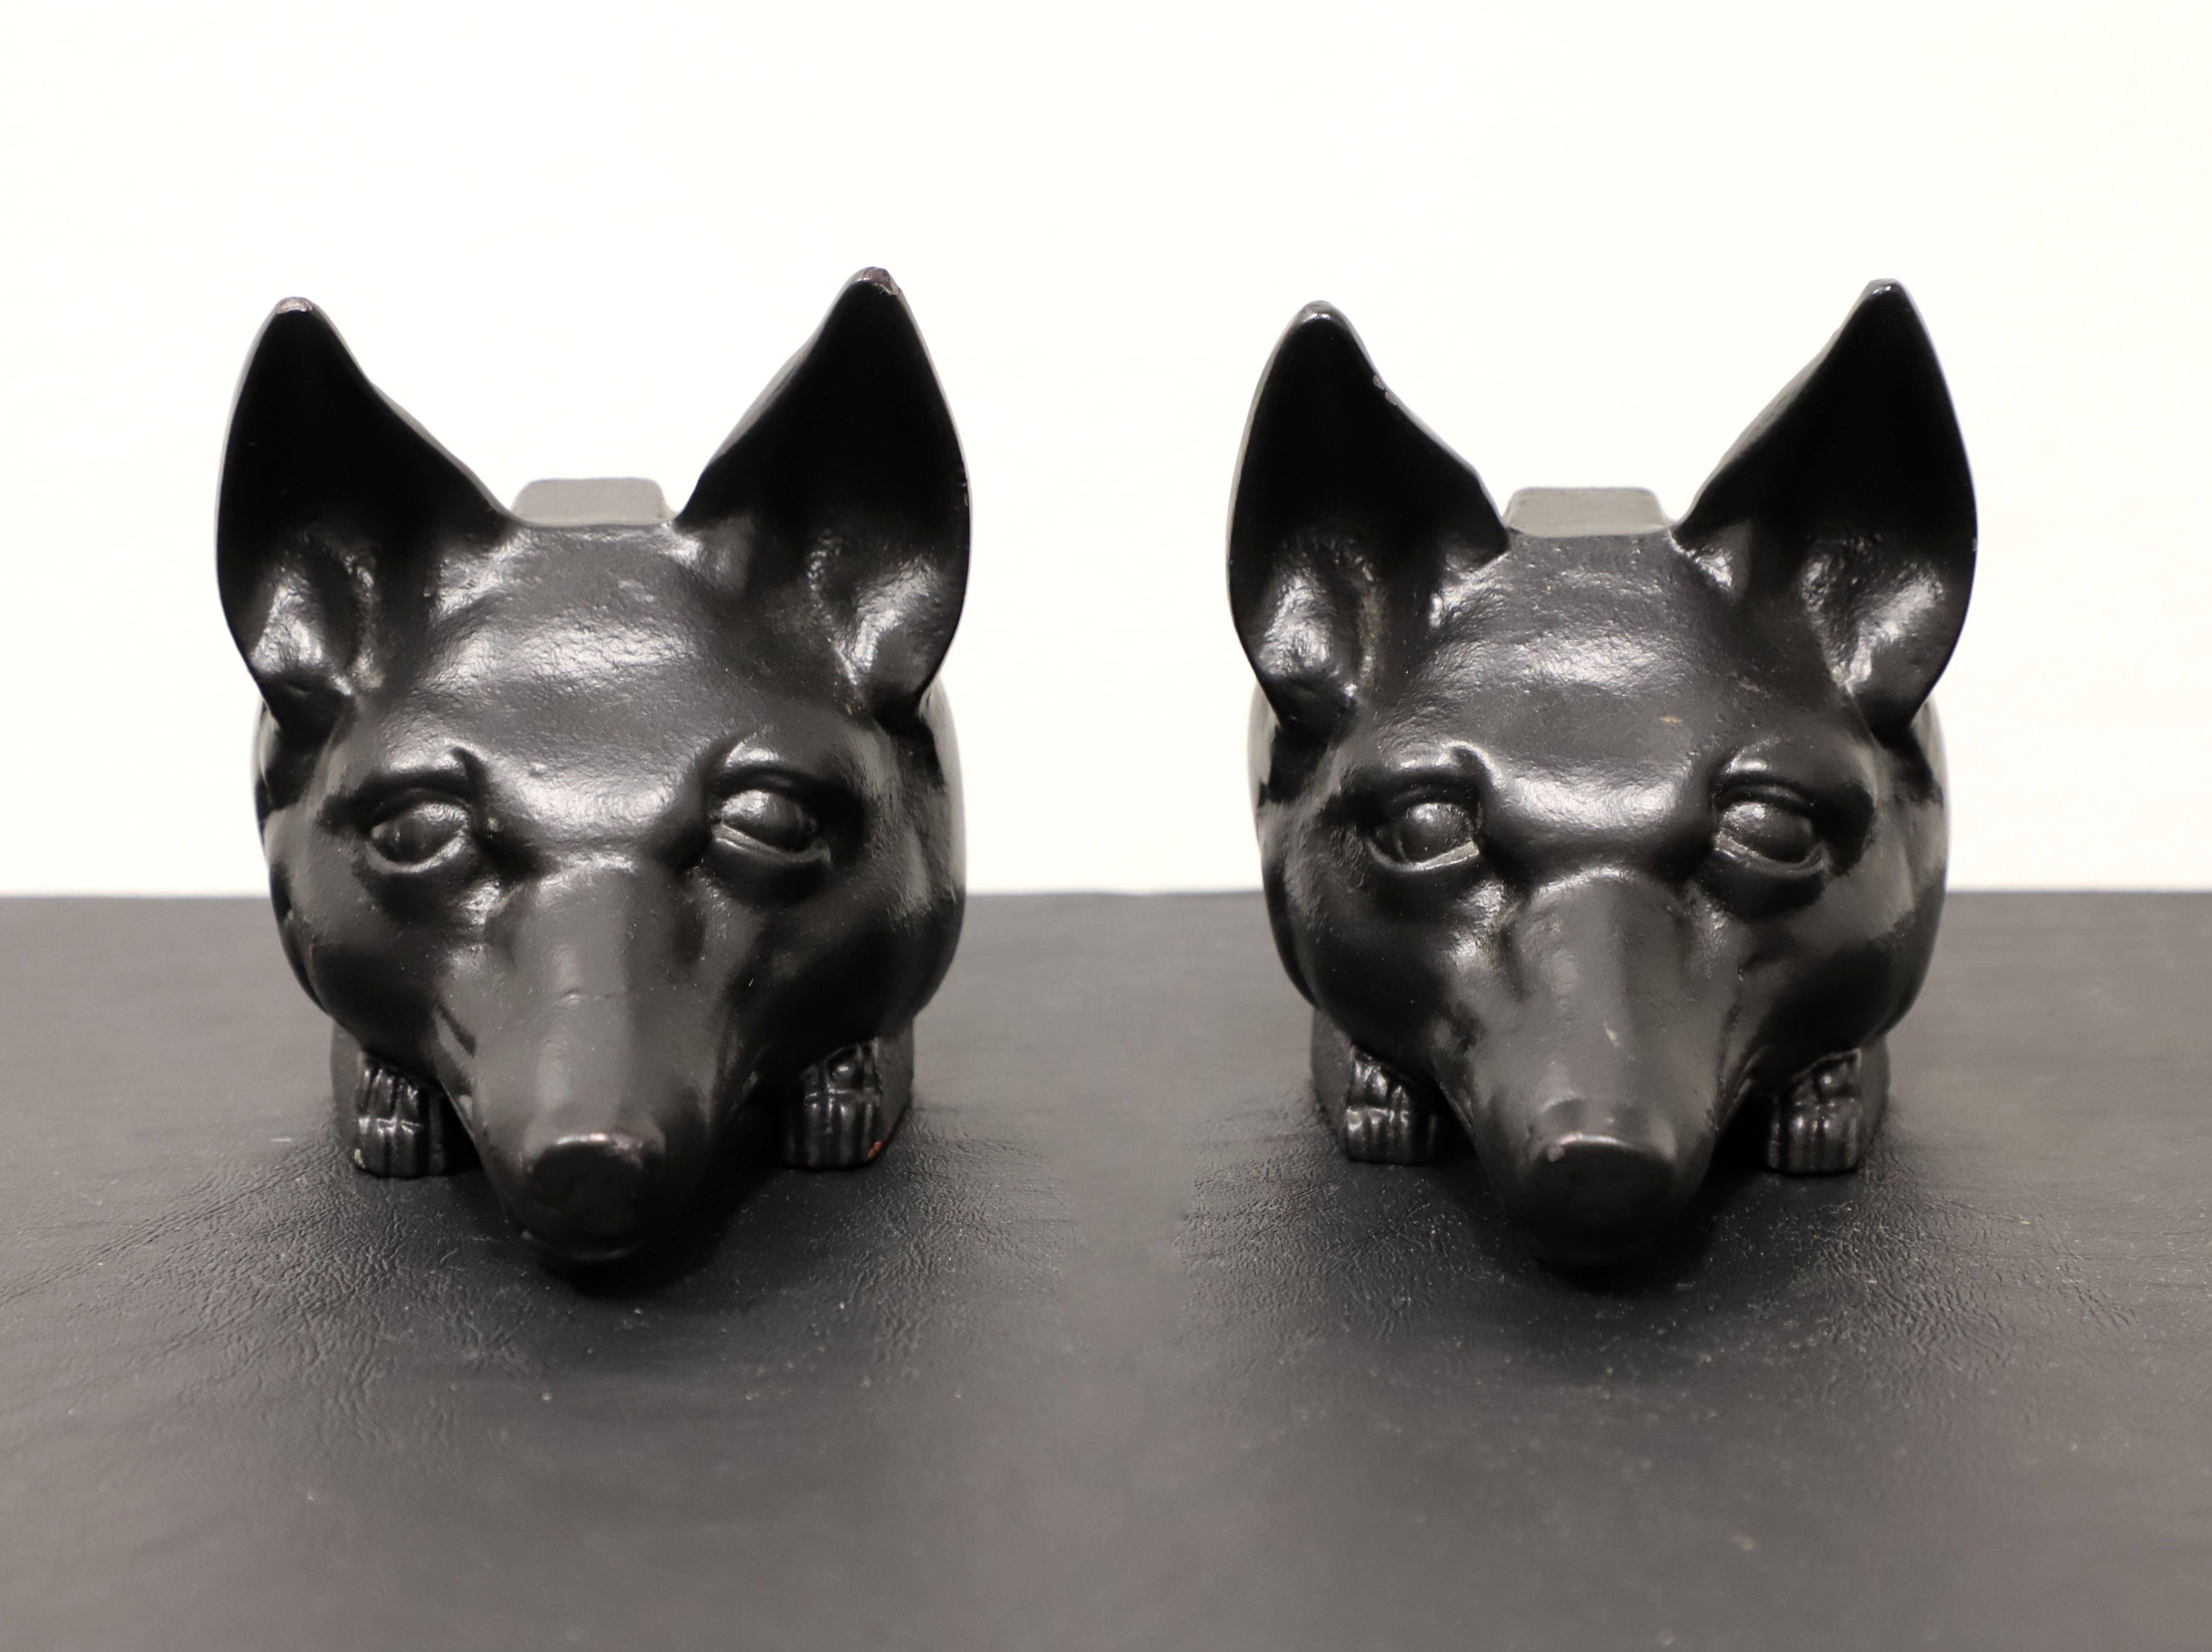 A pair of Late 20th Century bookends by Virginia Metalcrafters. Black color cast iron depicting fox heads. Could alternatively be used as doorstops. Made in Virginia, USA.

Measures: 5.5w 4.75d 6.5h (Each), Weighs Approximately:  4 lbs